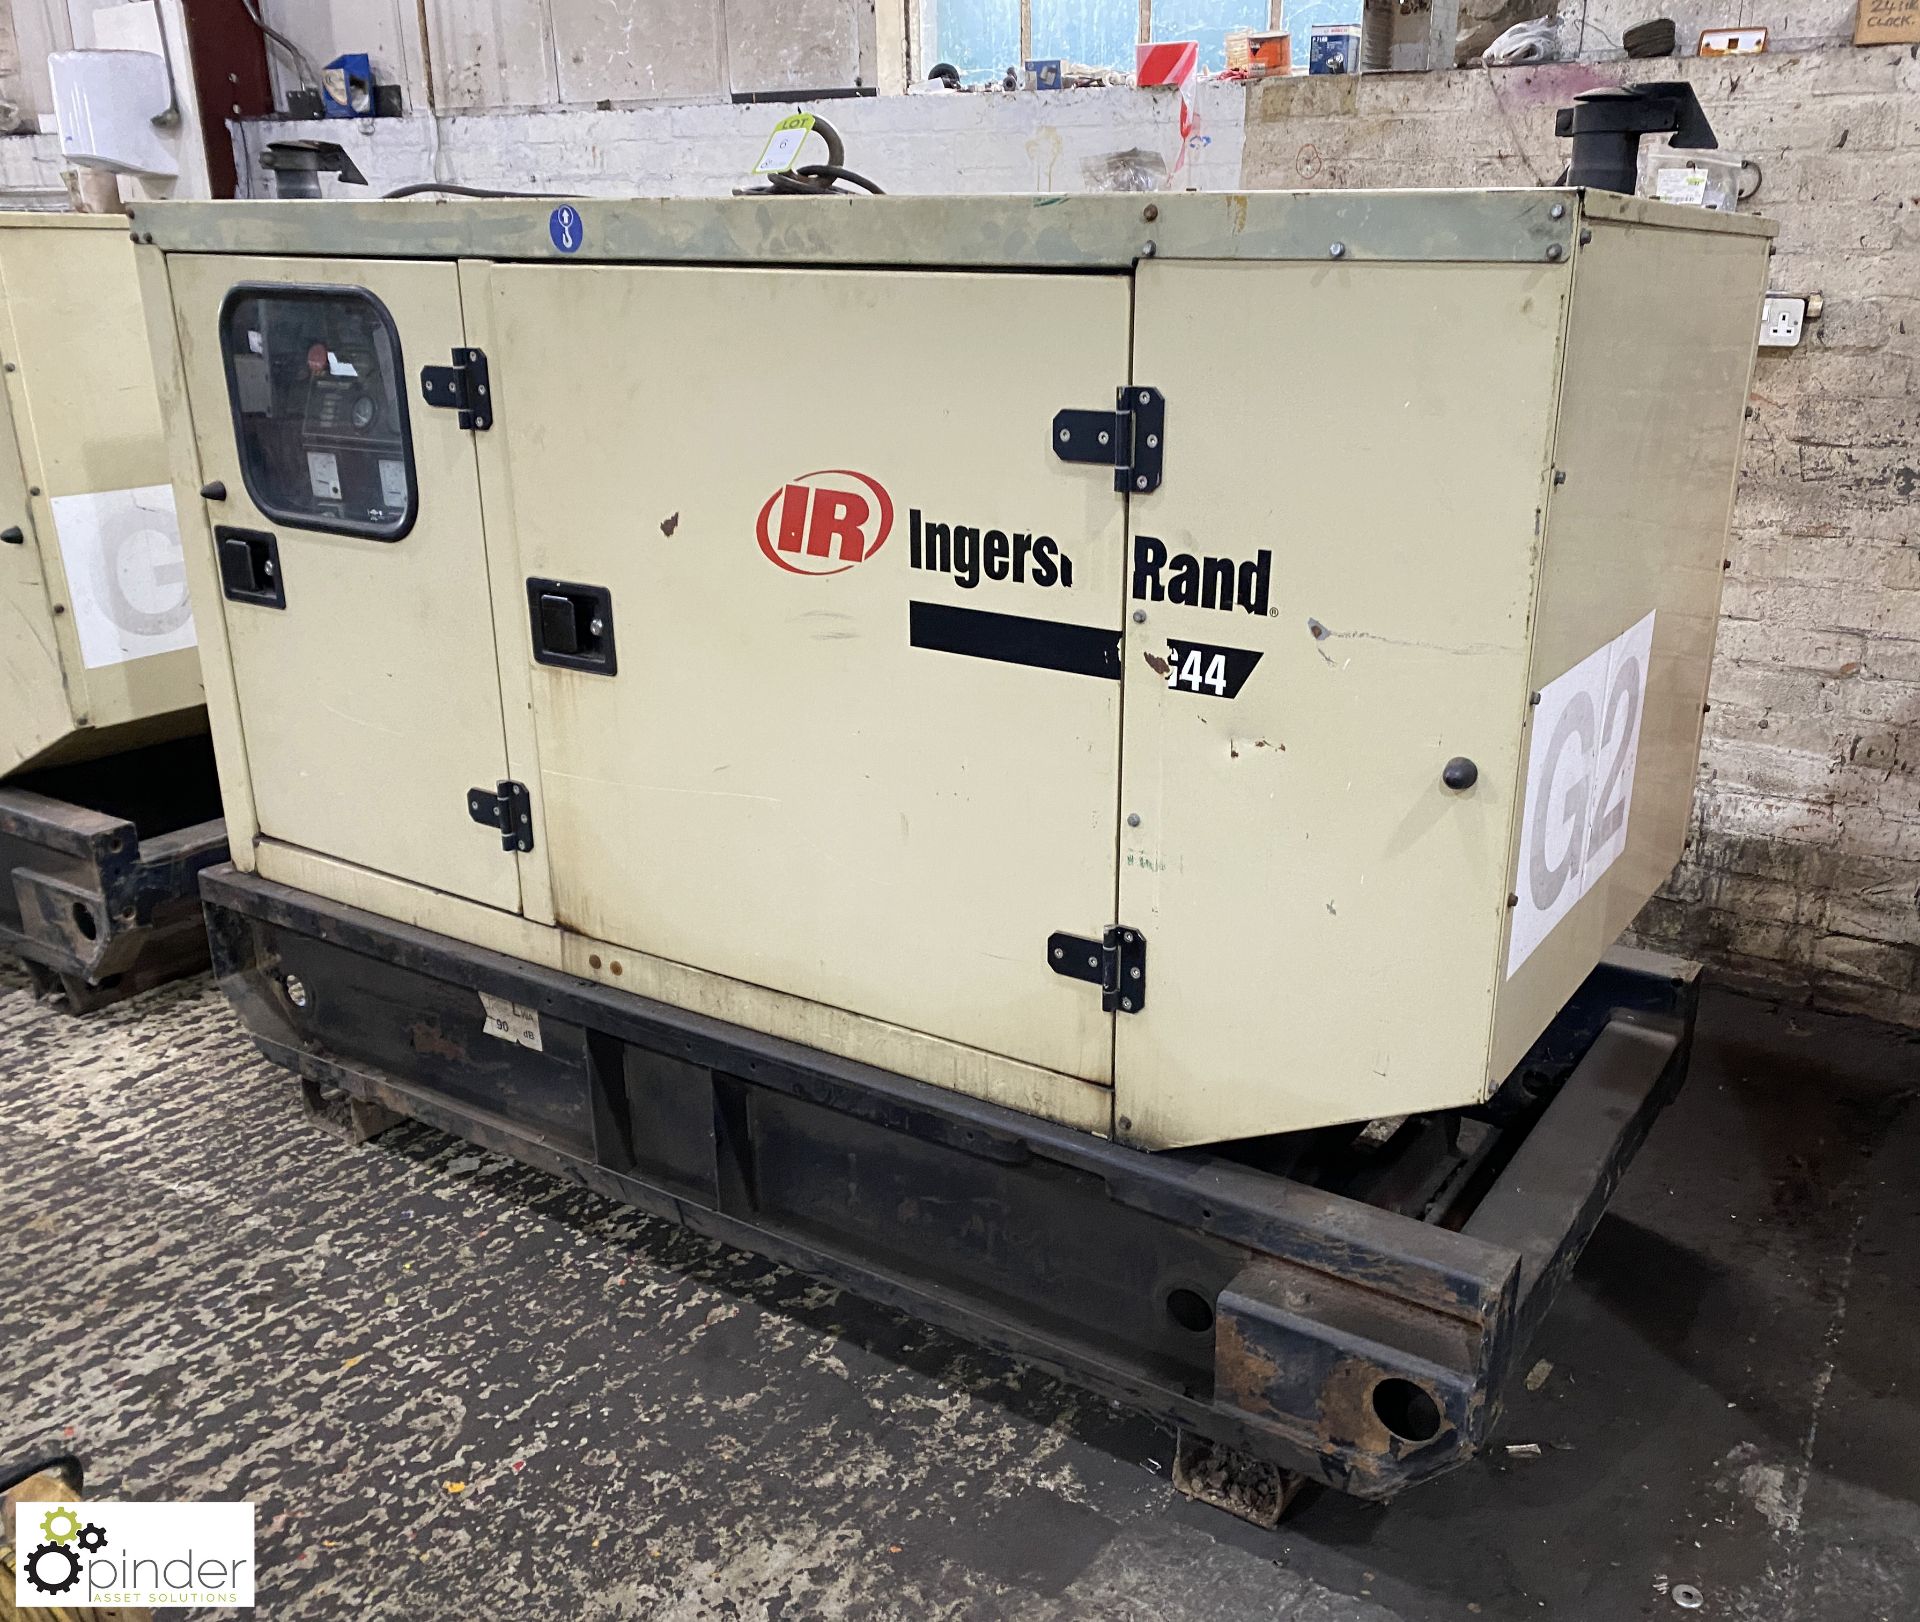 Ingersoll Rand G44 skid mounted Generator Set, 44kva, 37176hours, with acoustic cabinet - Image 2 of 11